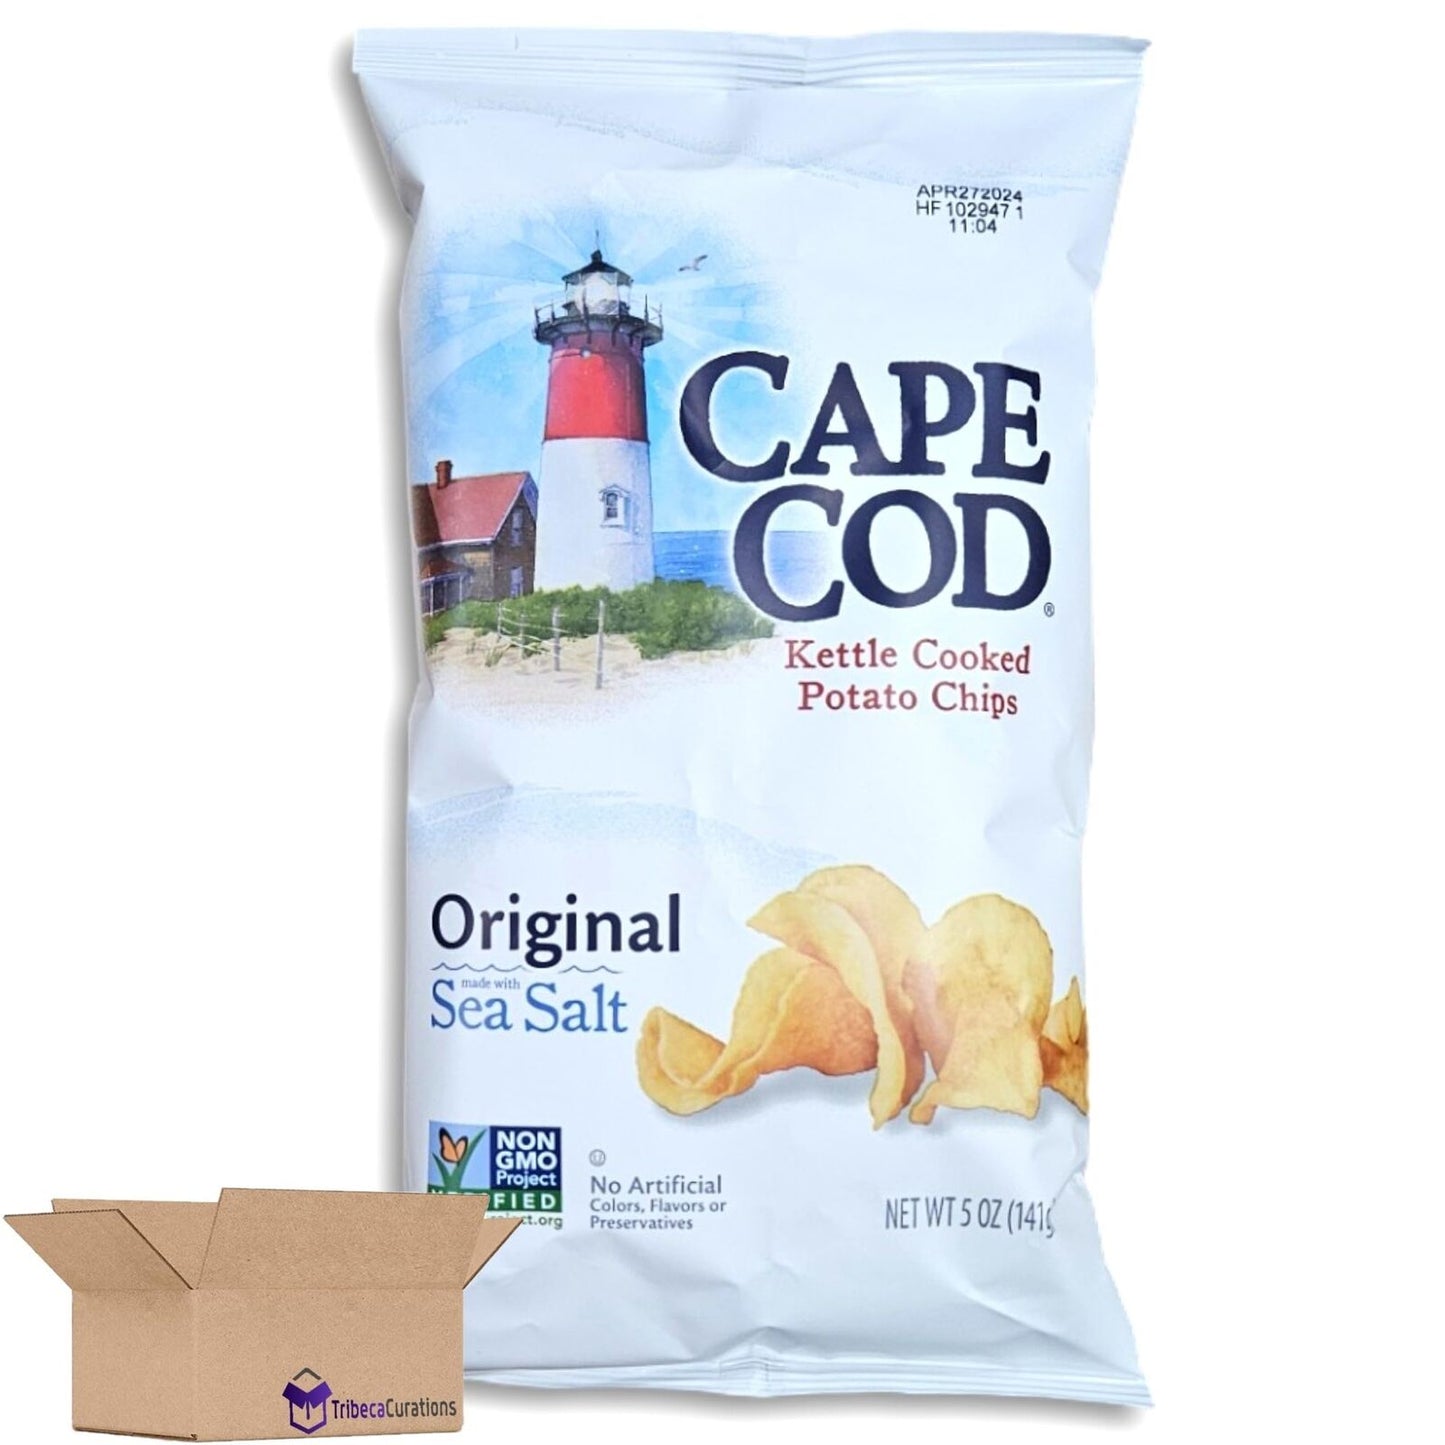 Cape Cod Kettle Cooked Potato Chips Value Pack | Bundled by Tribeca Curations |